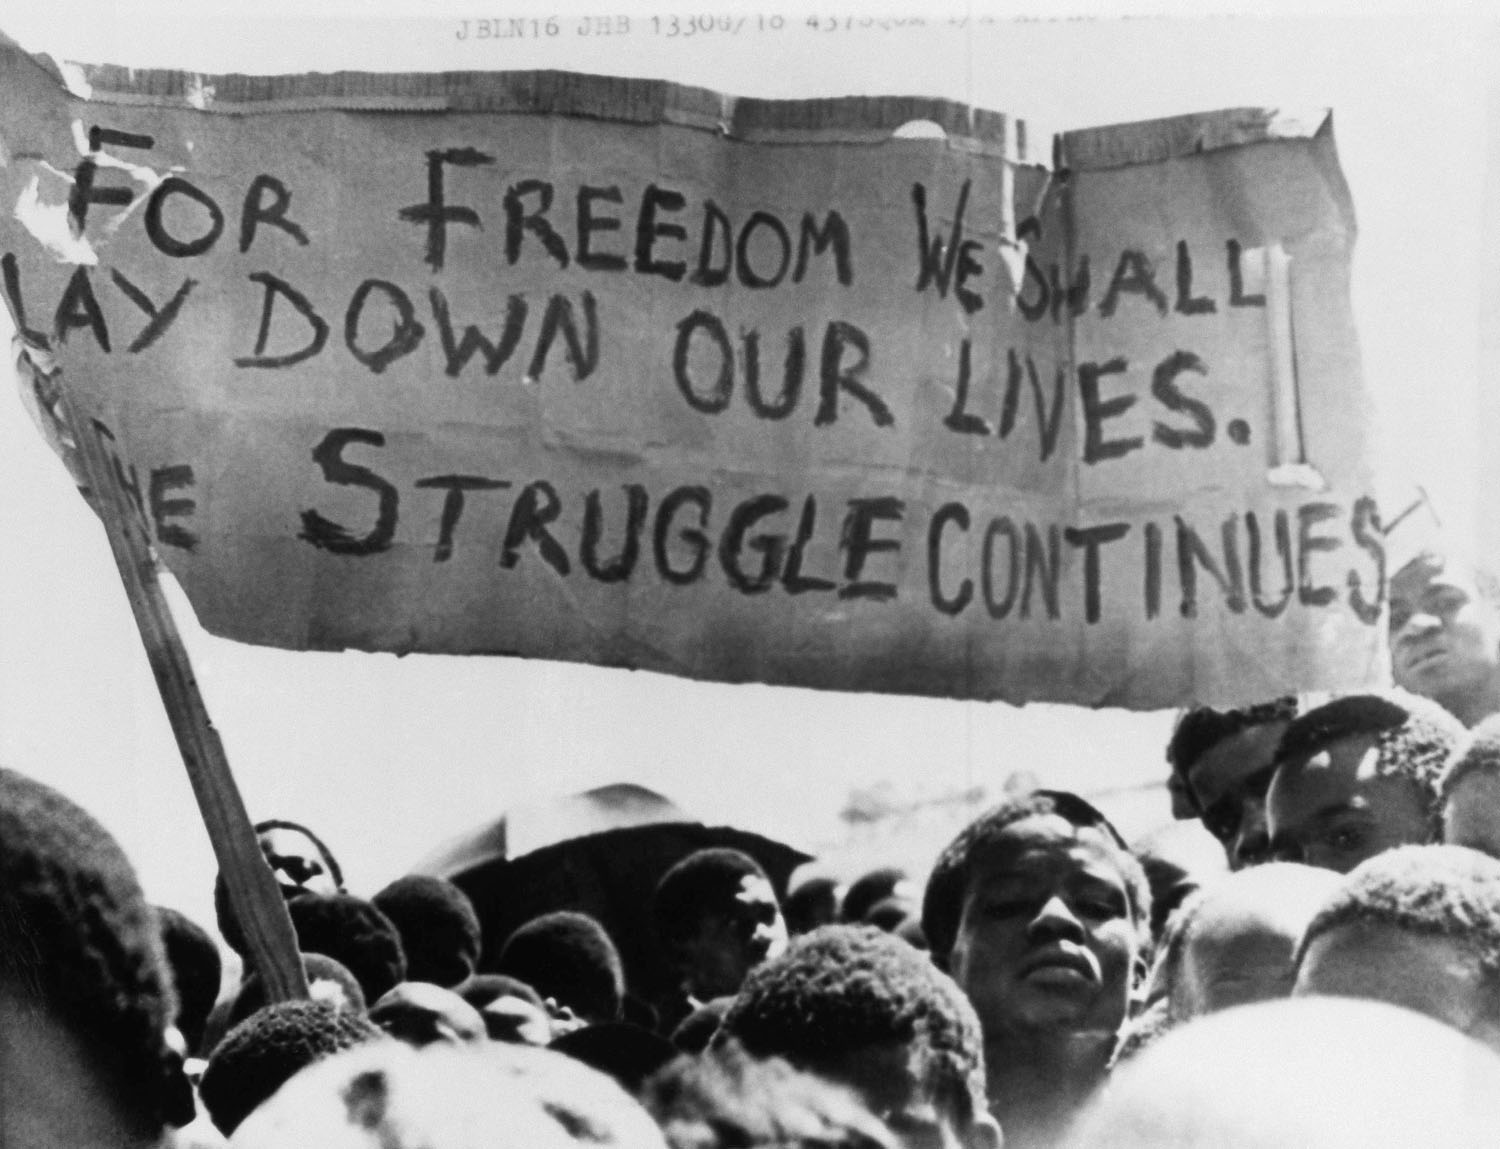 Essay: Civil Rights Movement in the United States